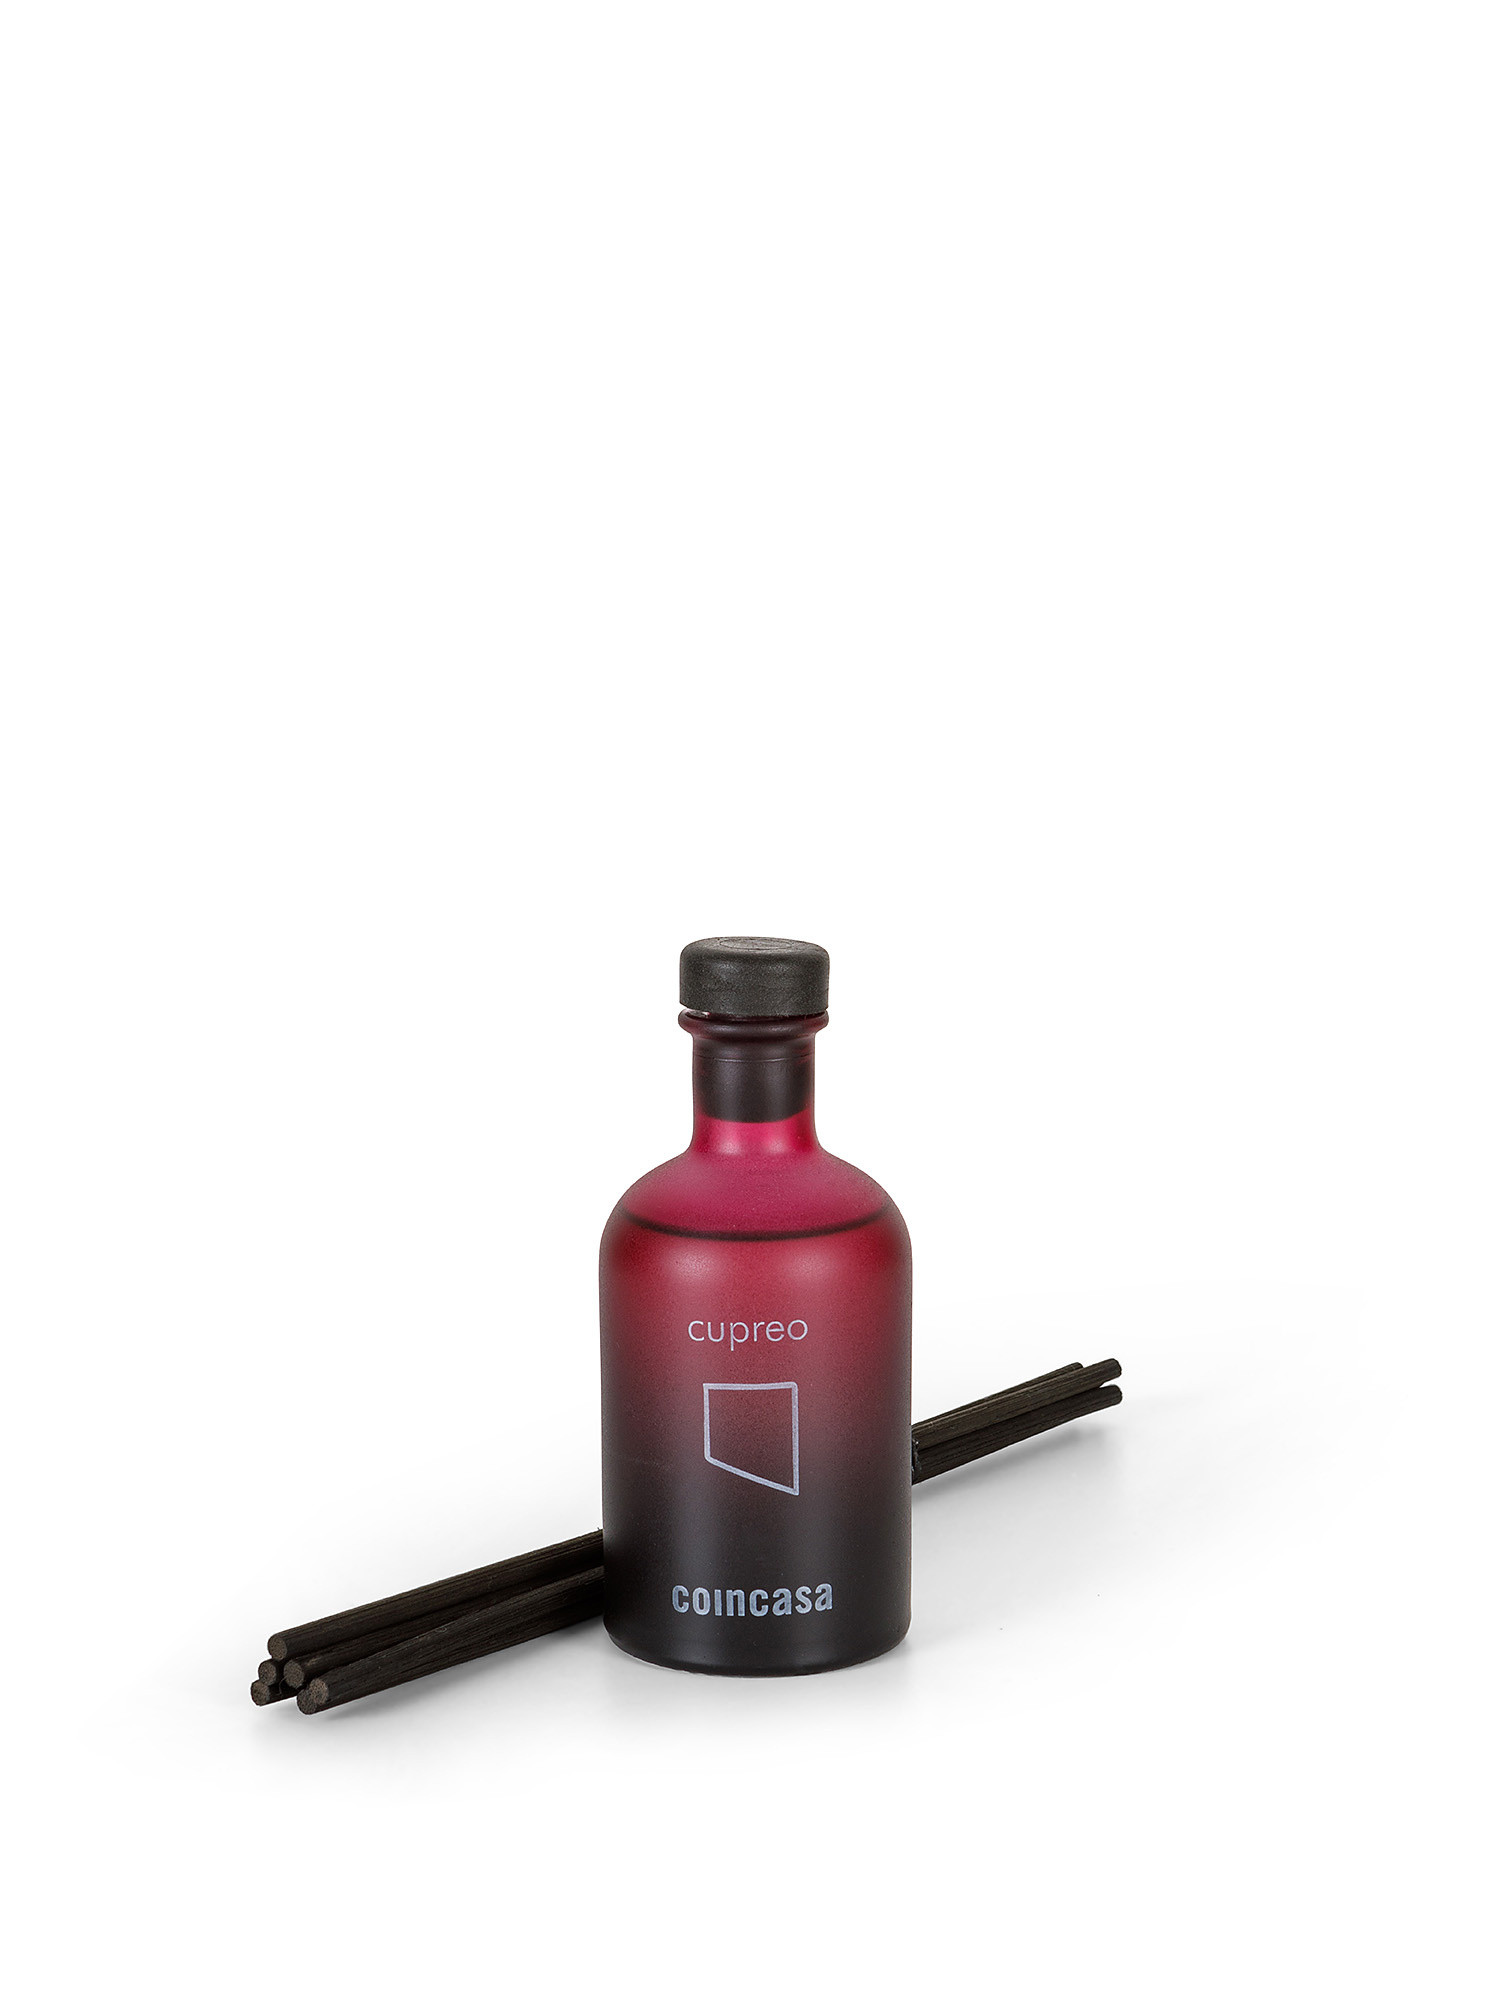 Cupreo Diffuser - Black Pomegranate 100ml, Black, large image number 0